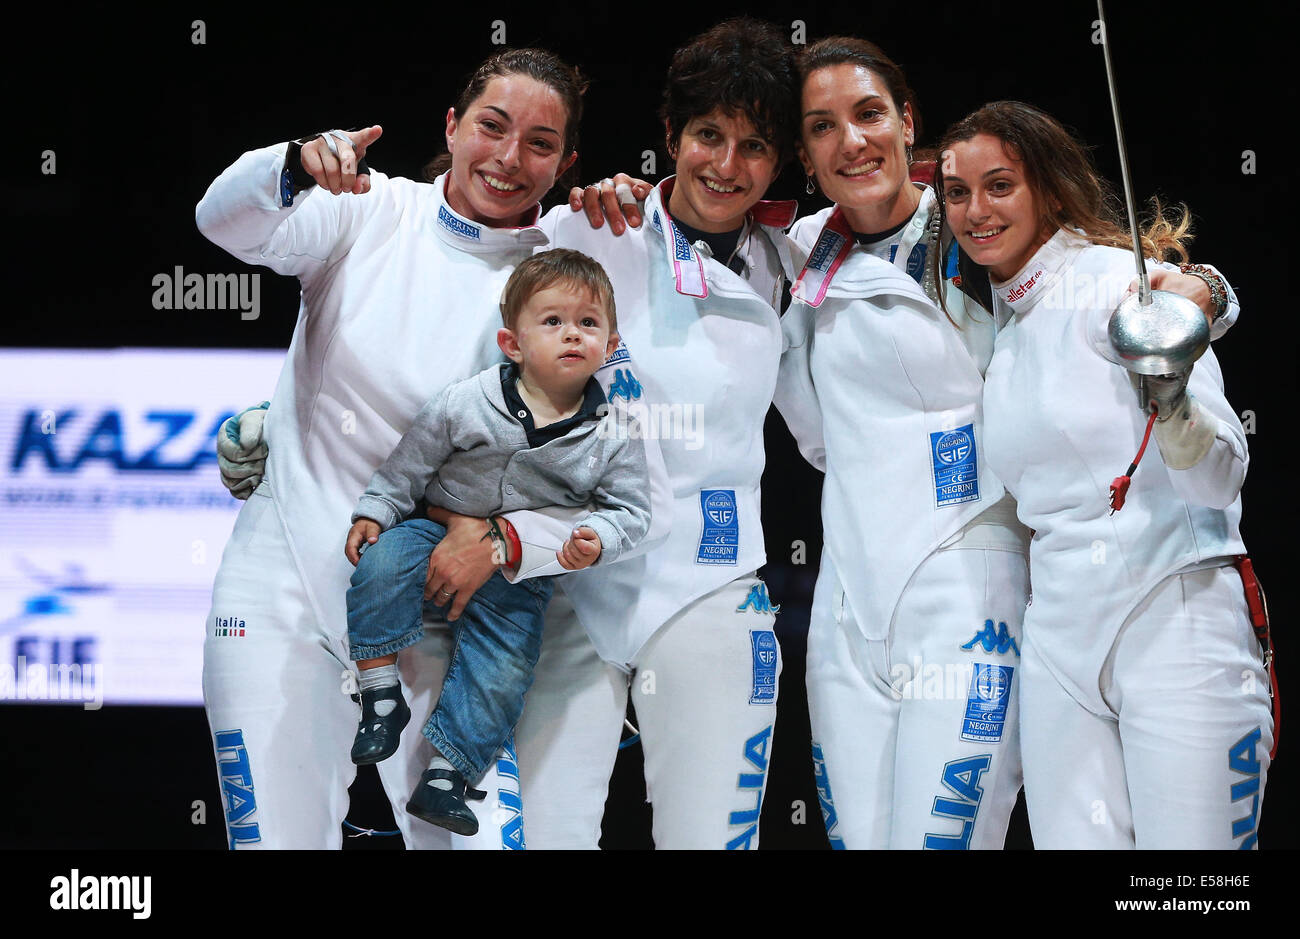 Kazan Russia 23rd July 2014 Italian National Fencing Team Members Mara Navarria With Son Samuel Bianca Del Carretto Francesca Quondamcarlo And Rossella Fiamingo L R Pose For A Group Photo As They Celebrate